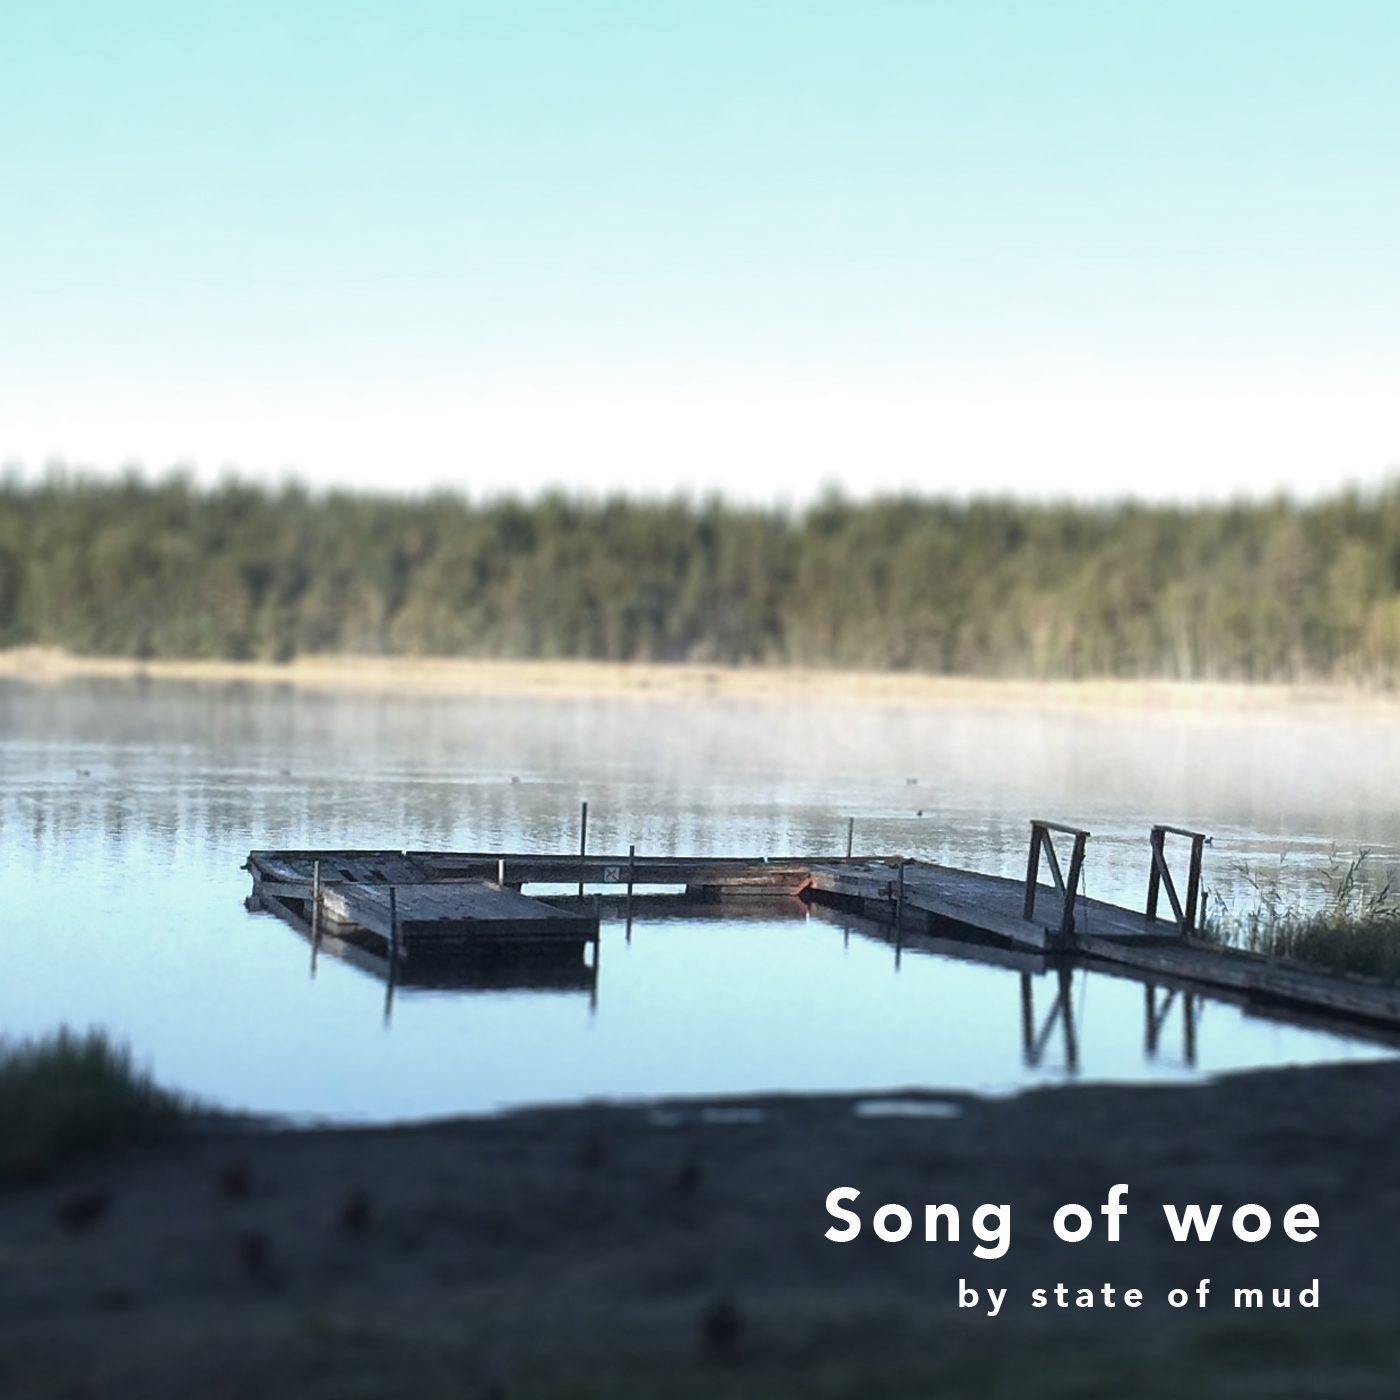 Song of woe